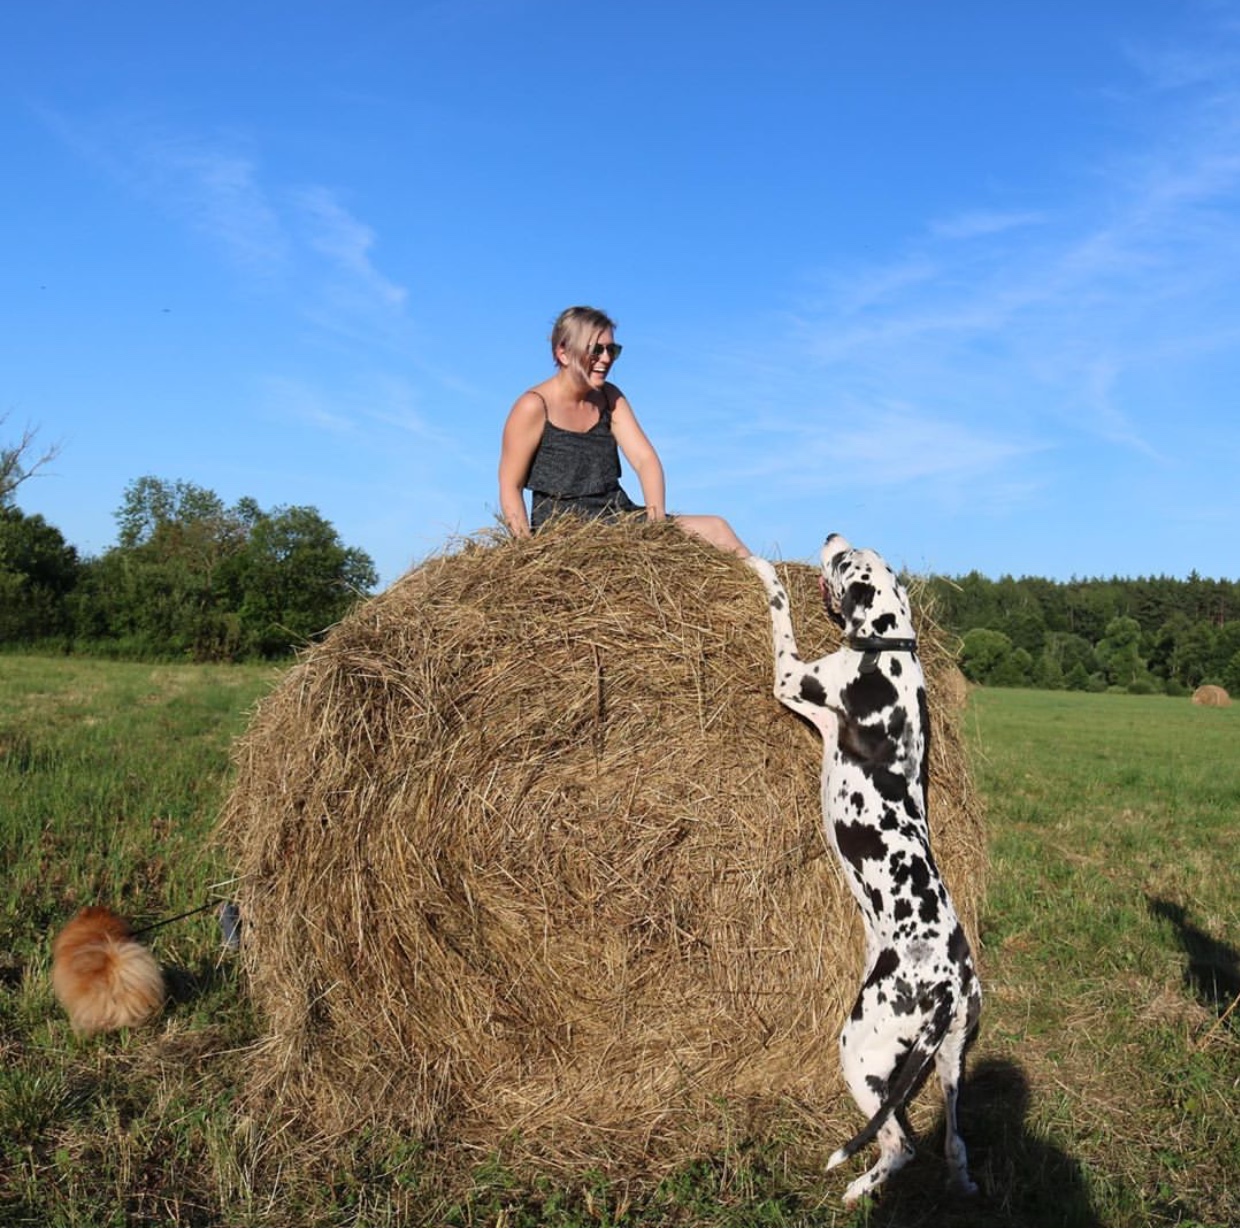 Great Dane standing up reaching at the woman on top of a large bale of hay in the field